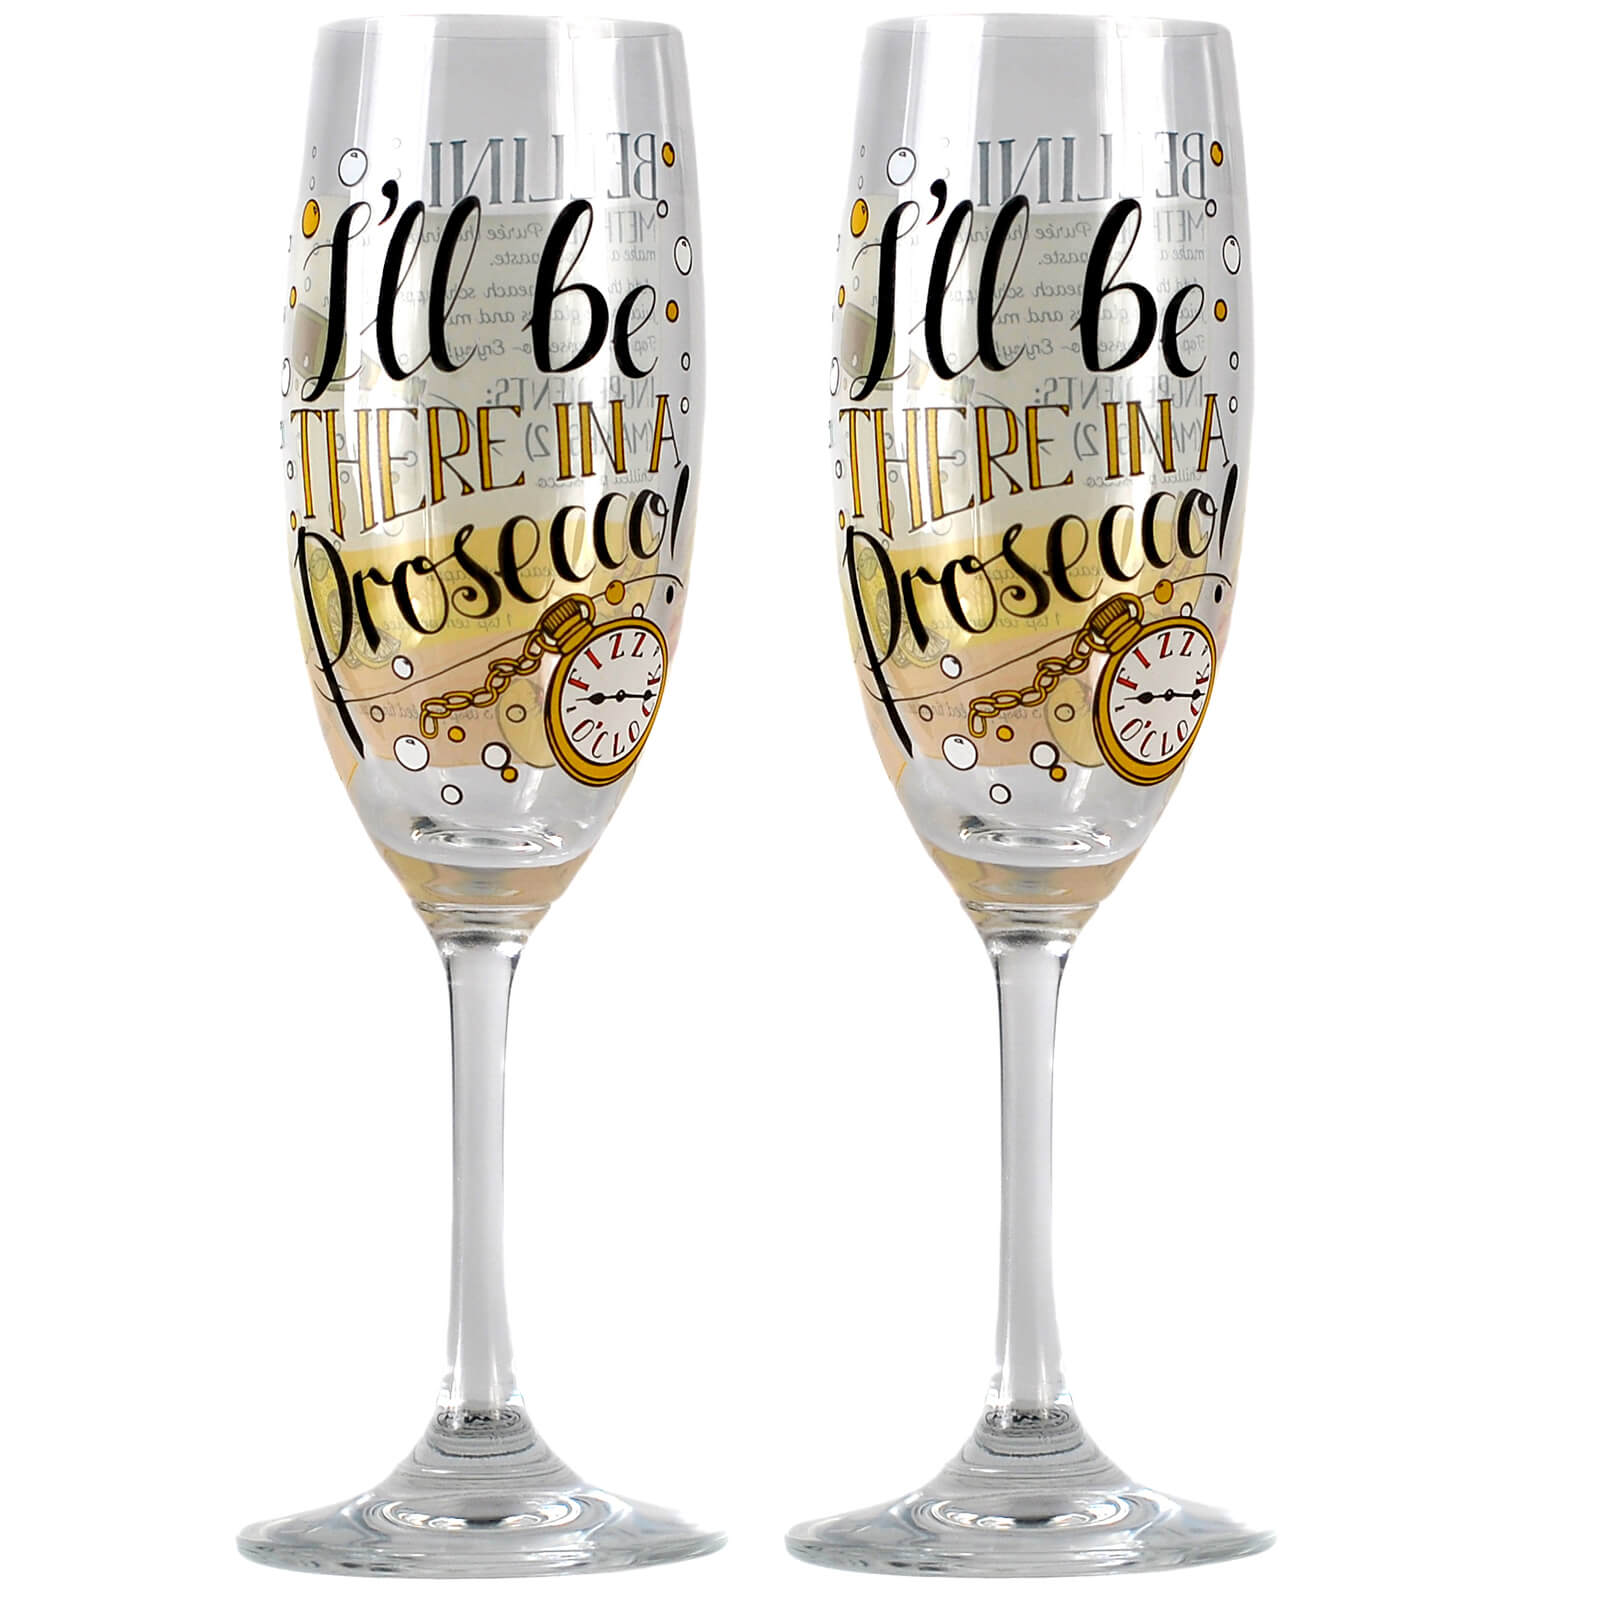 Glass Fun  Wall art vinyl decal sticker Prosecco Keep Calm and Drink Prosecco